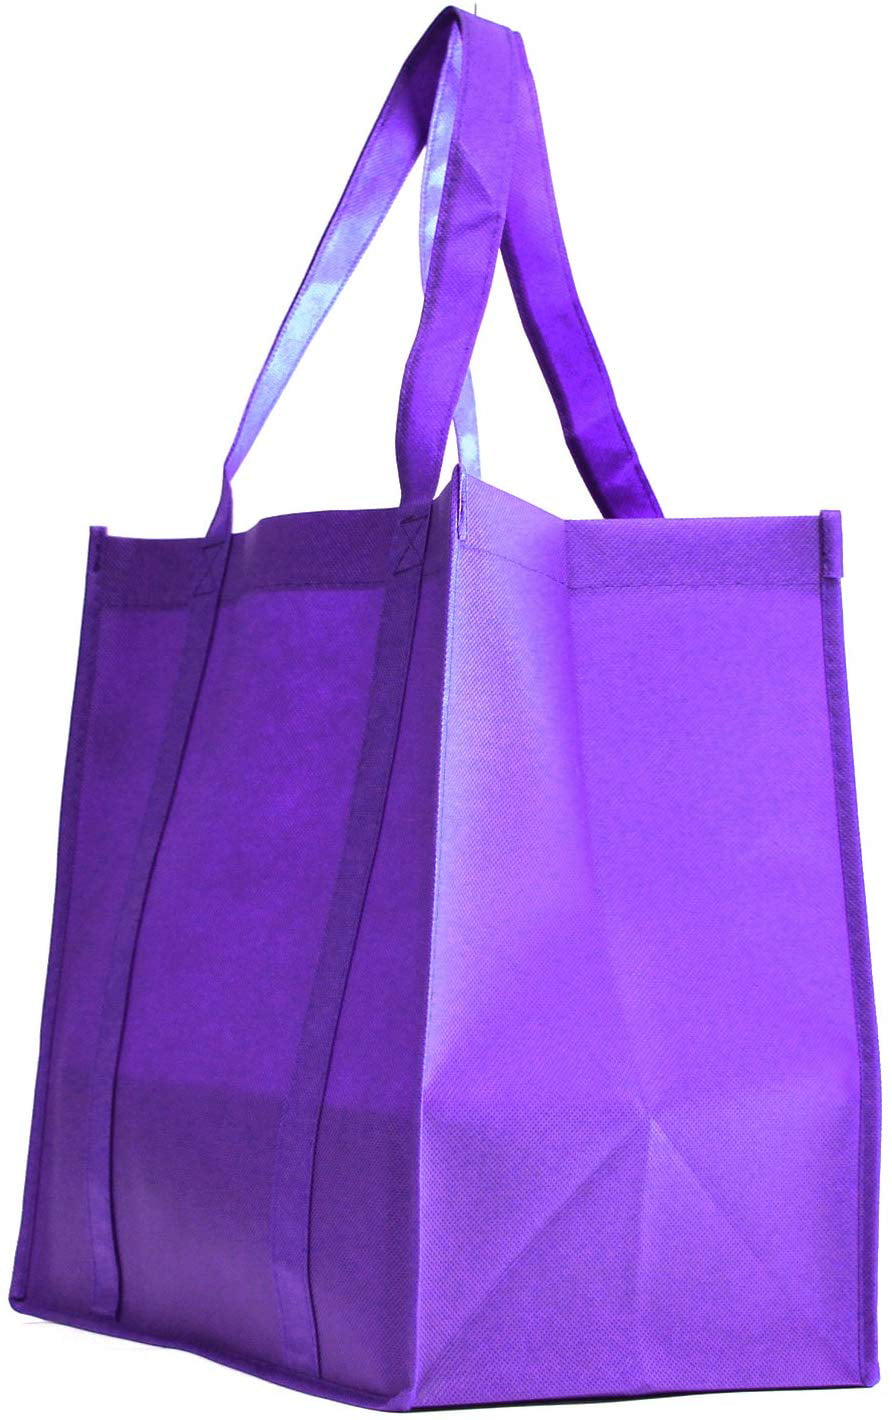 Medium Tote recycled tote Purple tote polypro straps navy cotton lining purple tote hand-woven handmade PurpleNavyOlive